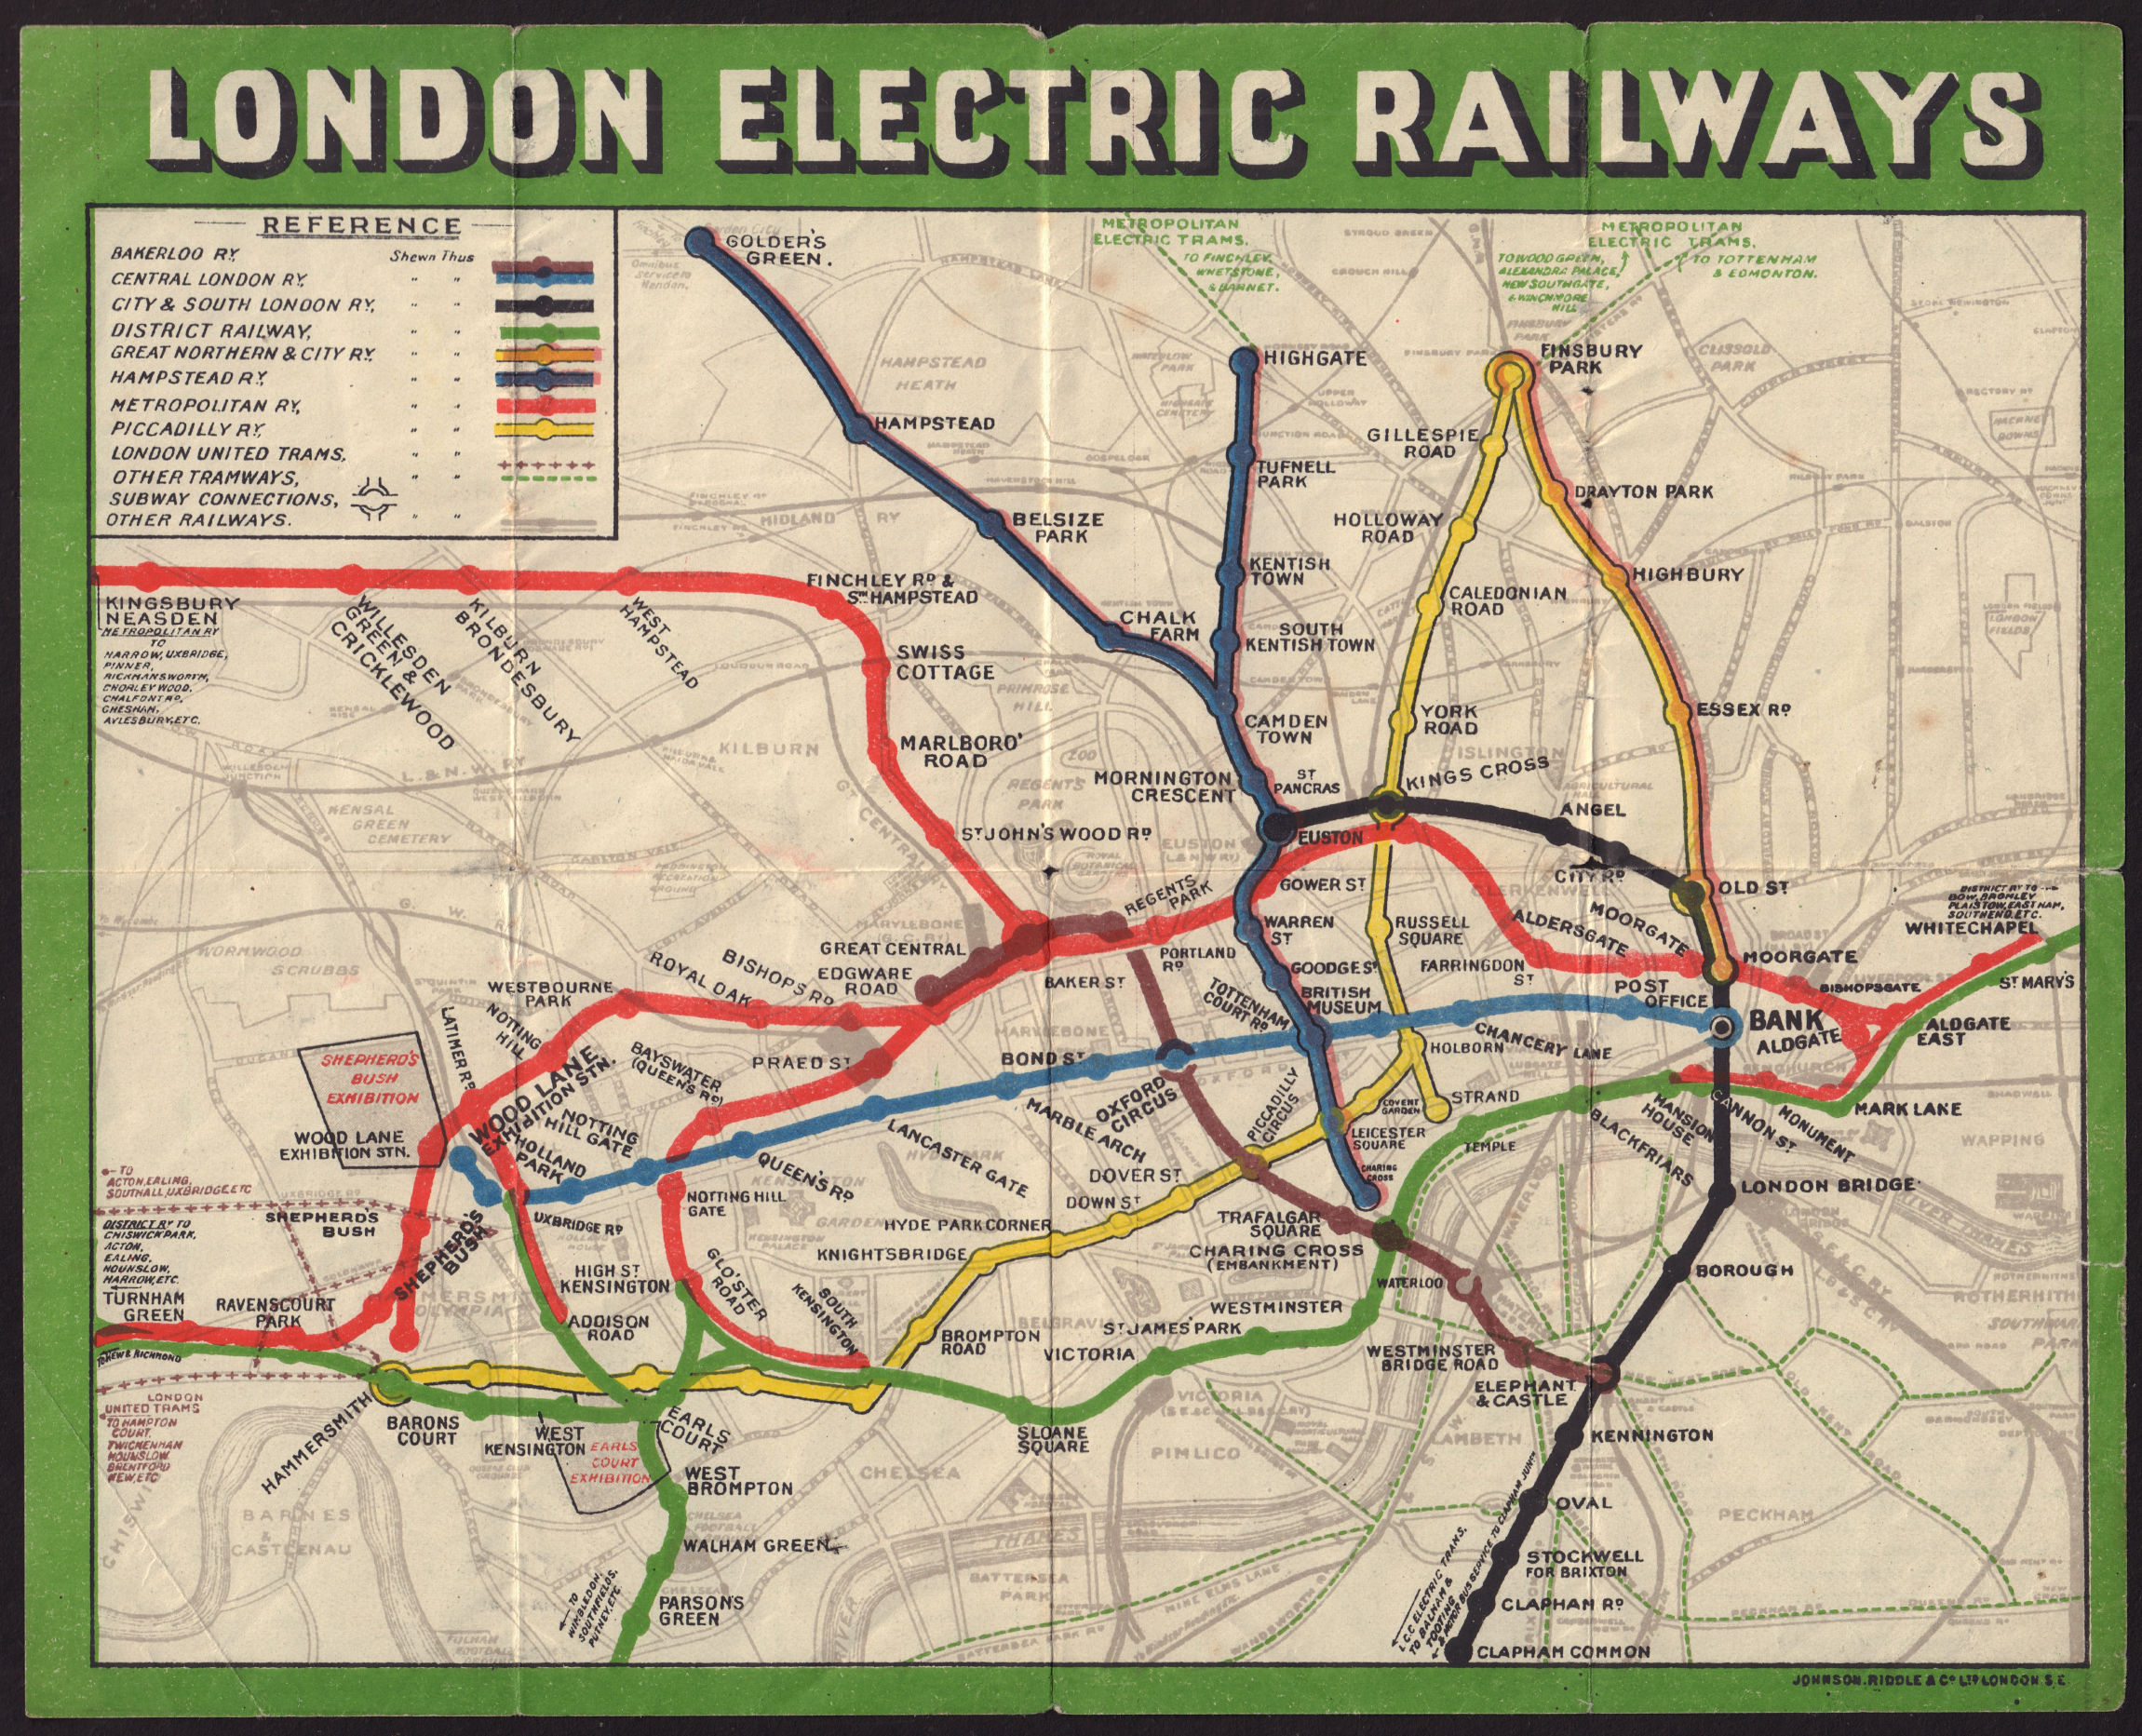 Associate Product London Electric Railways. Underground tube network map 1909 old antique